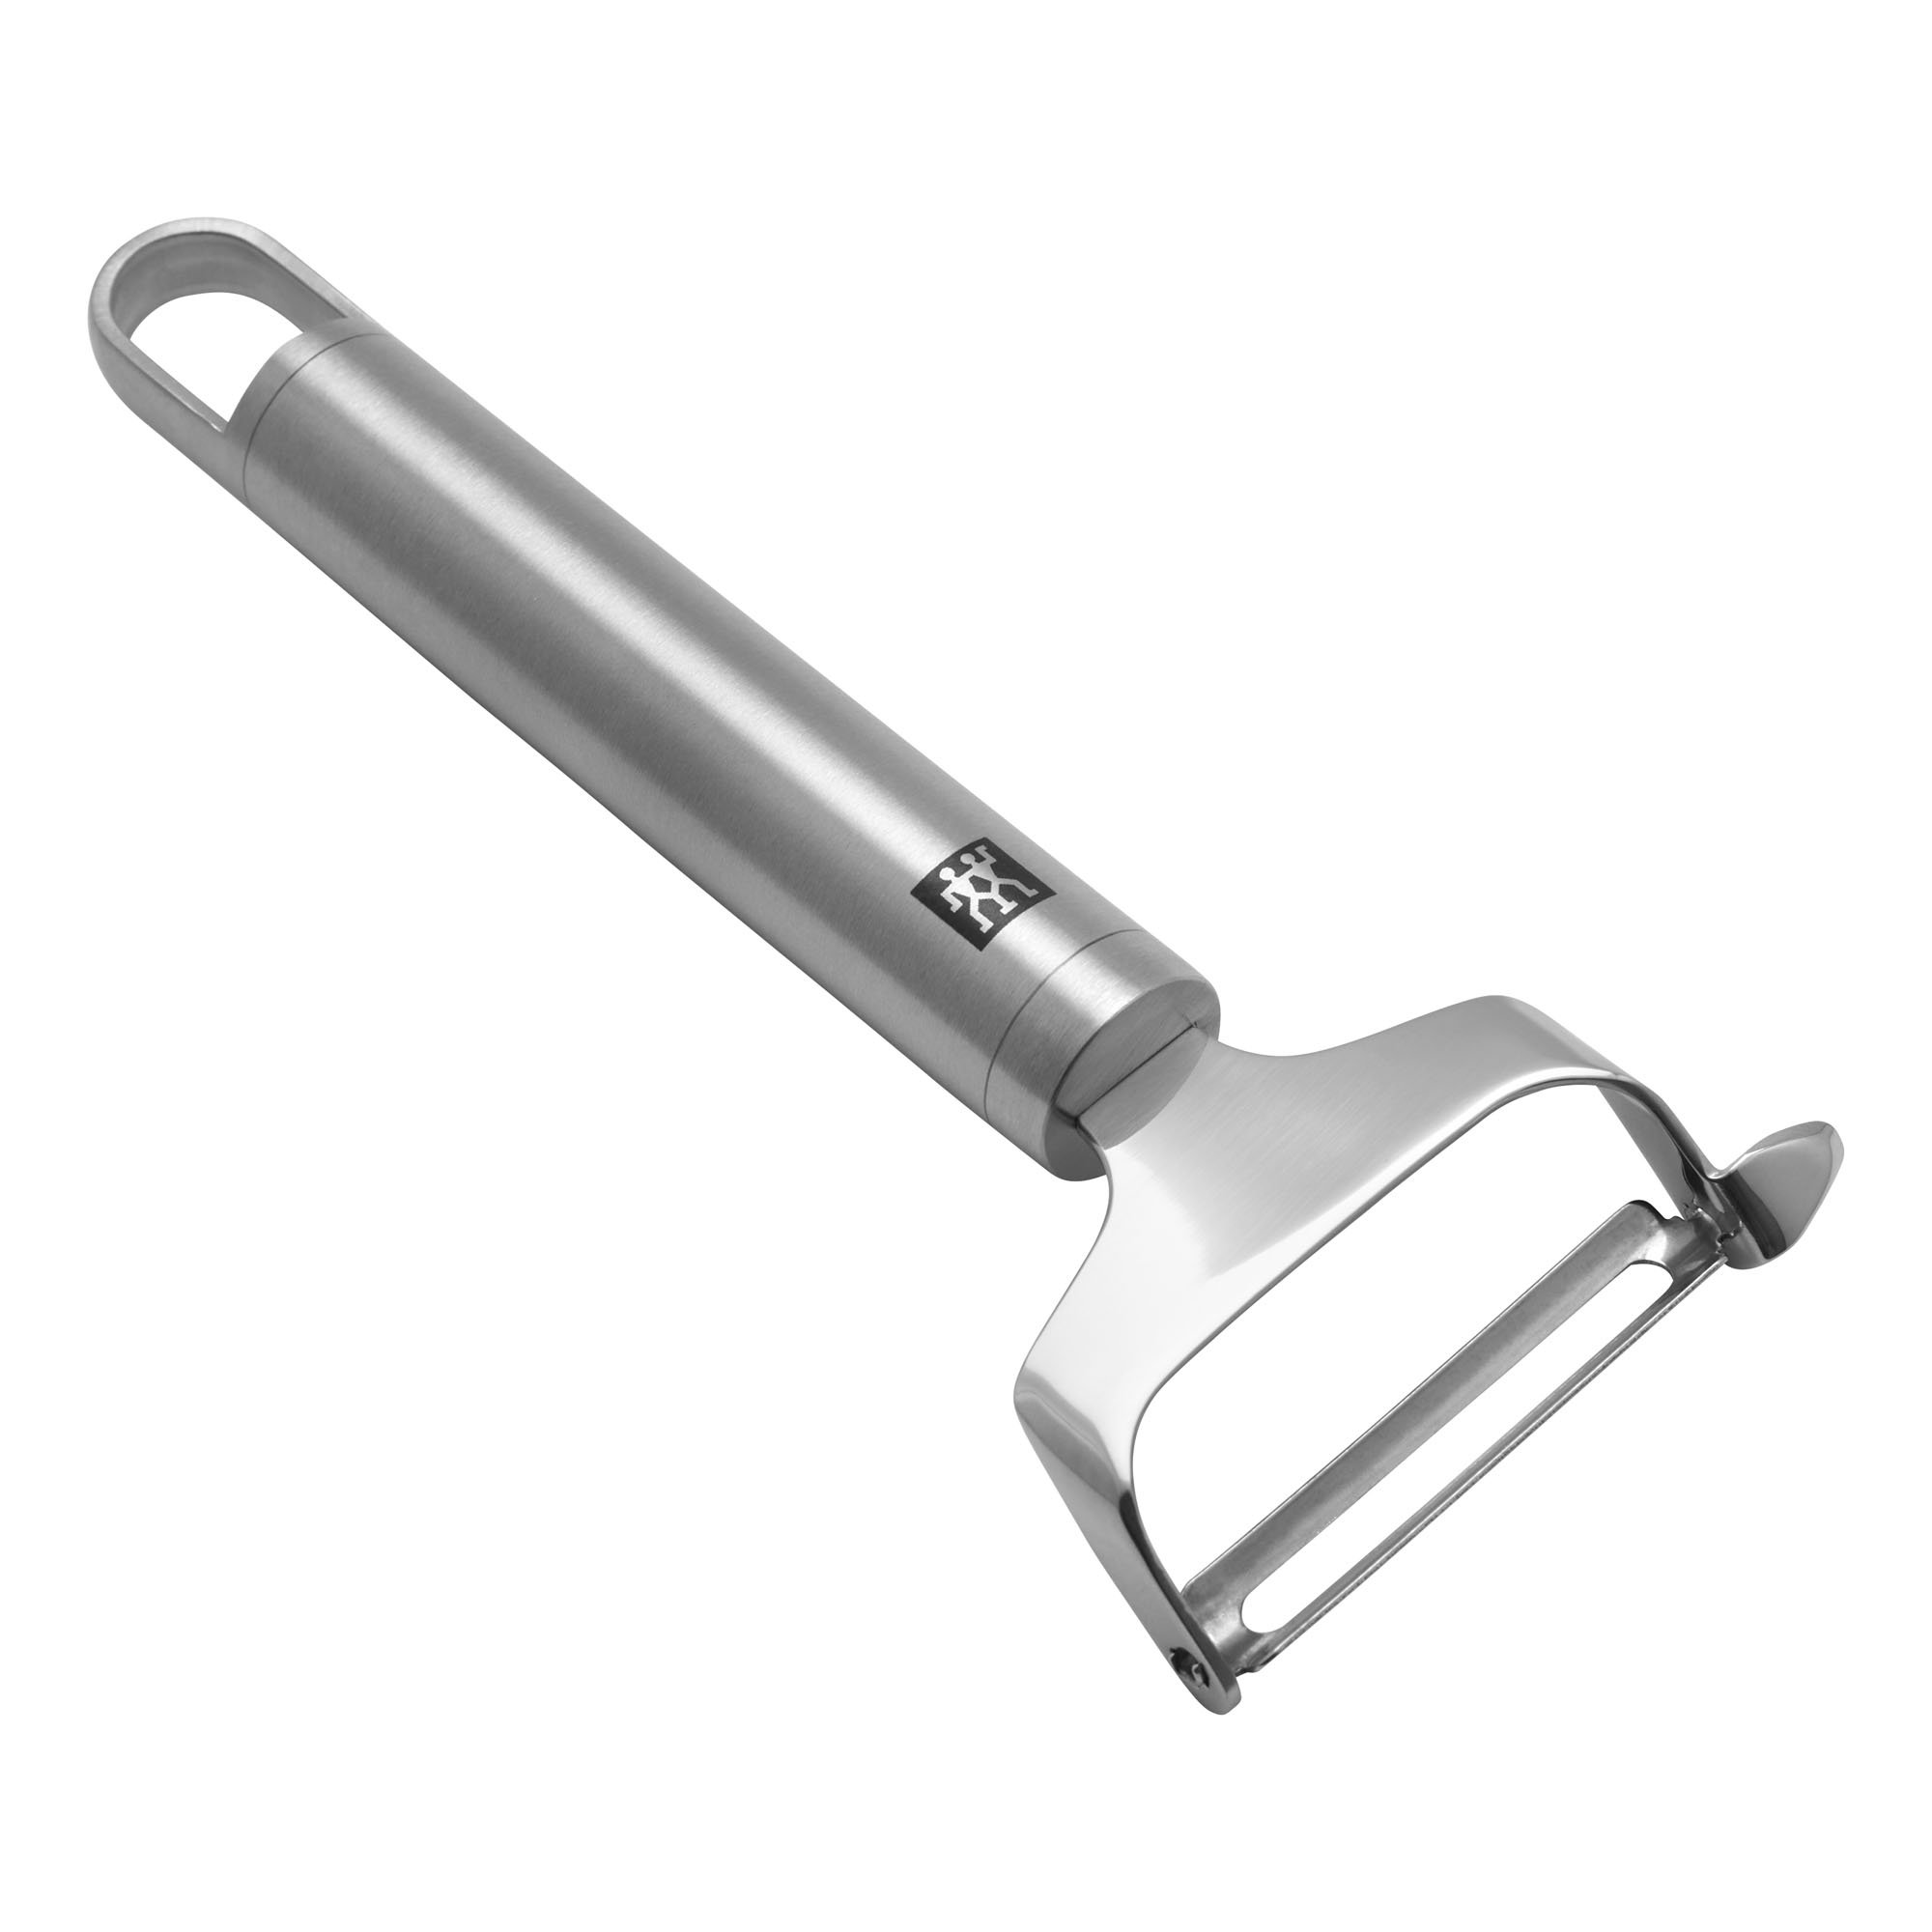 Chef Craft Classic Vegetable Peeler, 6 inches in length, Stainless Steel